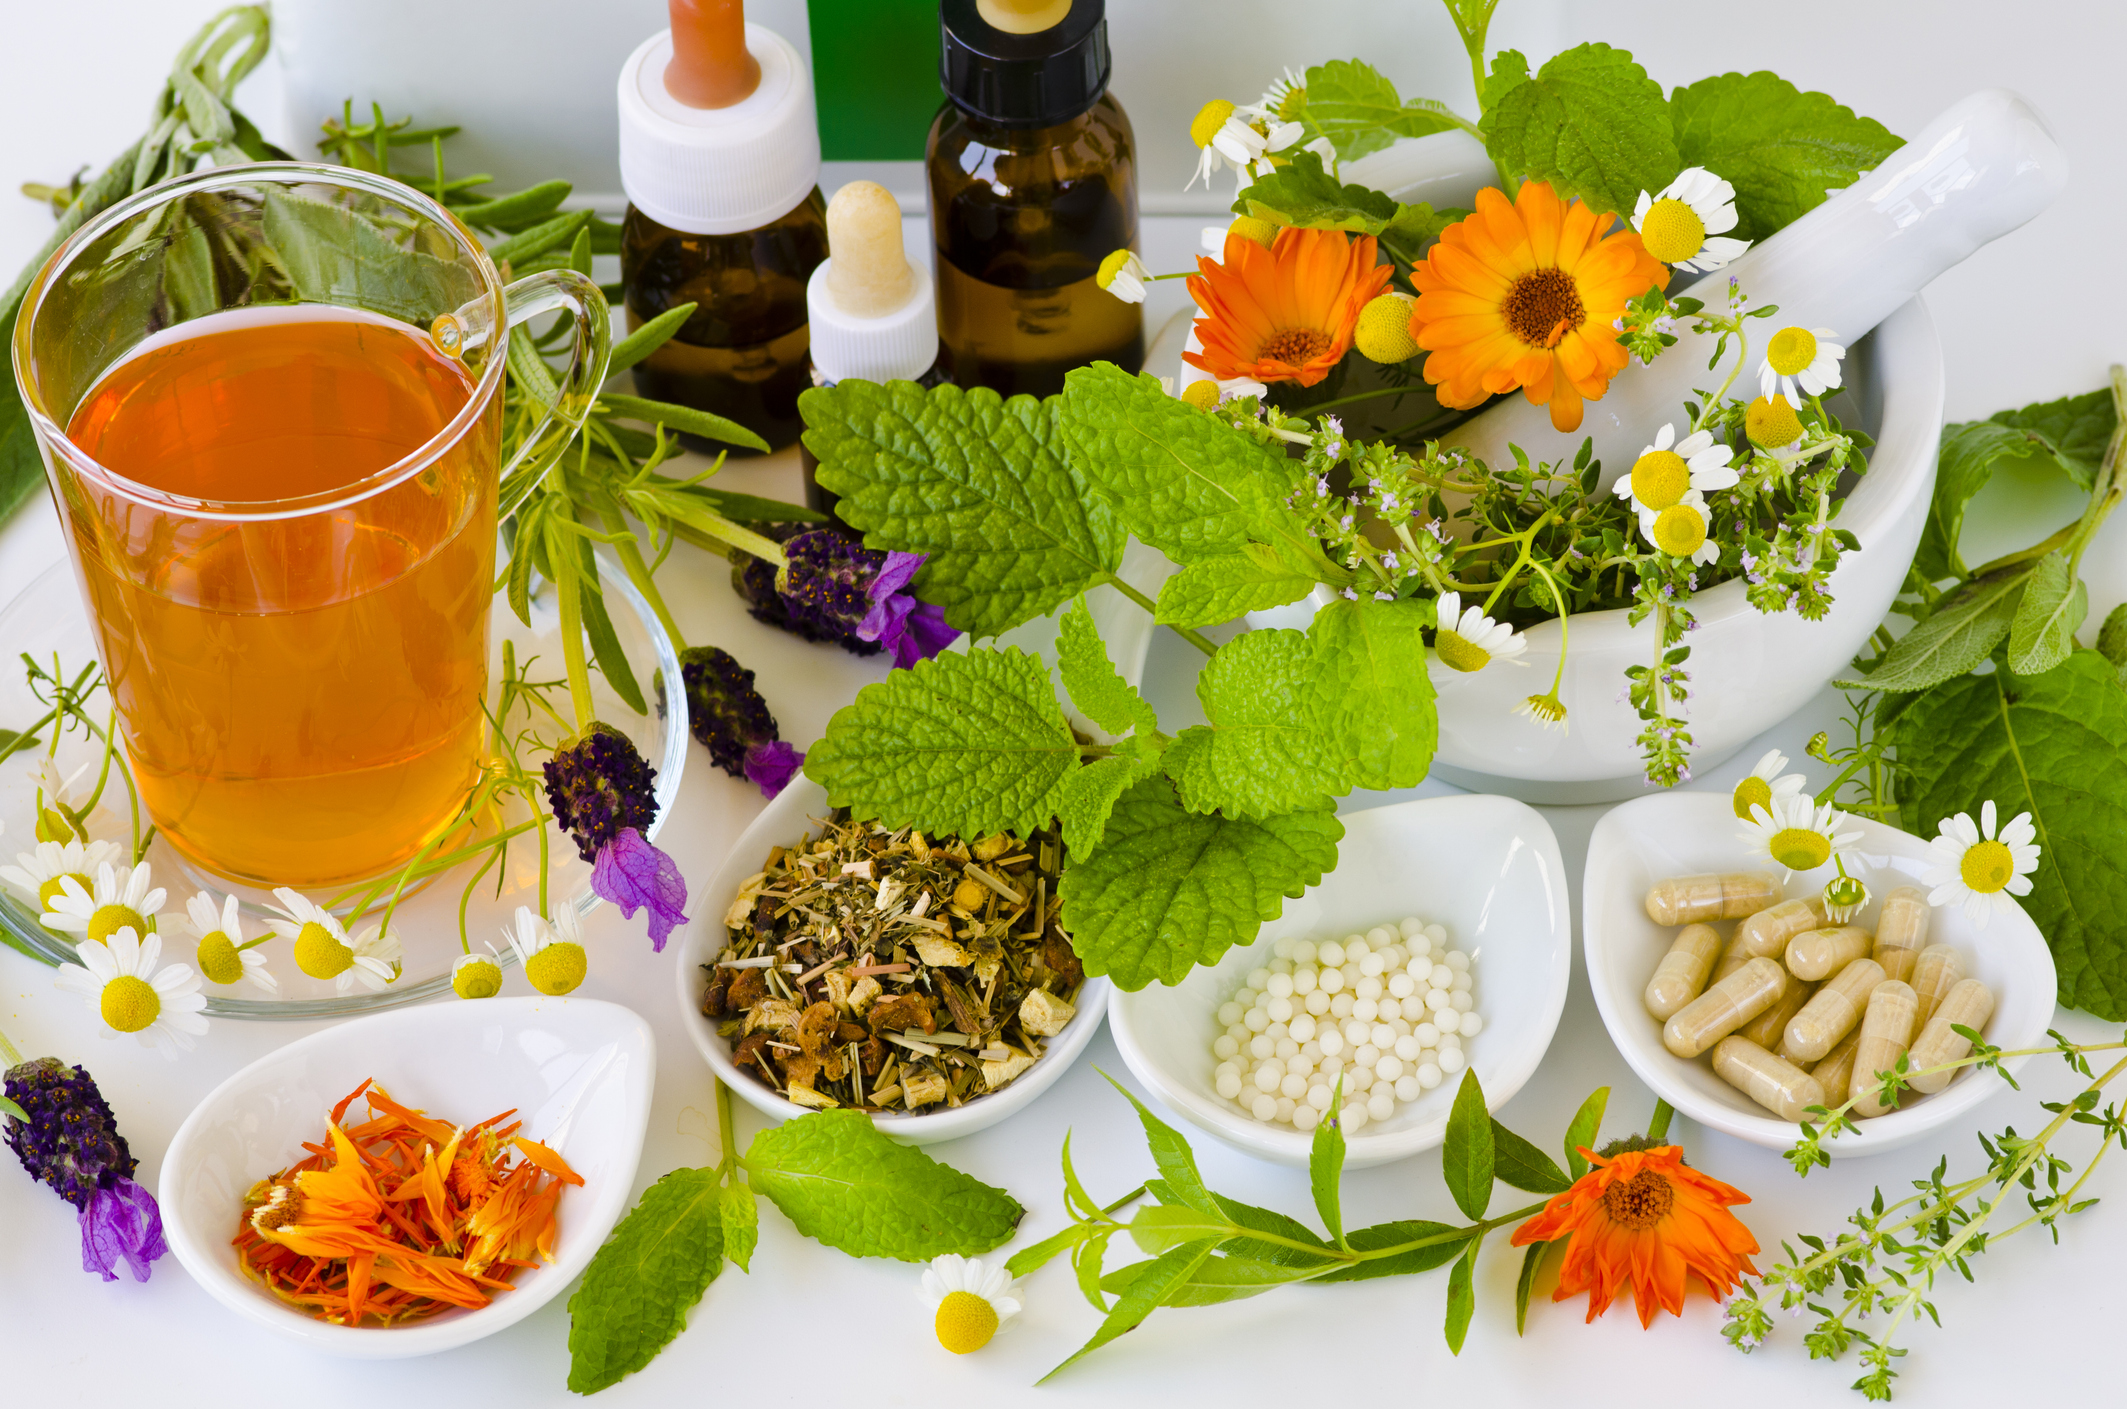 10 Natural Remedies to Boost Your Immune System